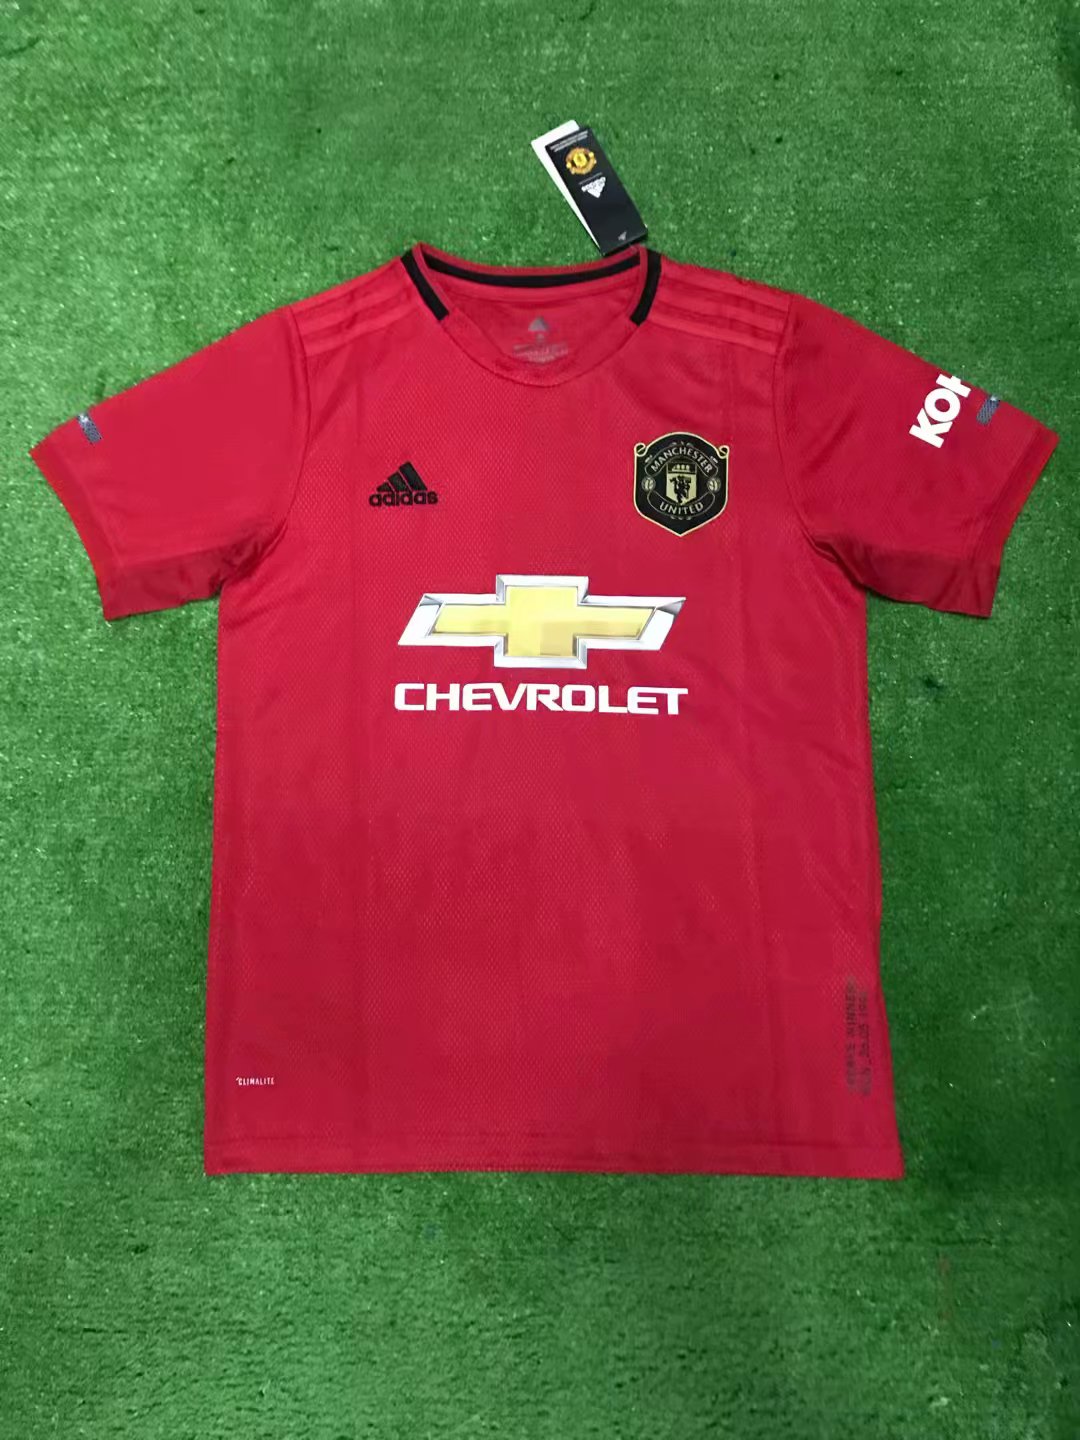 2019-20 Manchester United Home Soccer Jersey